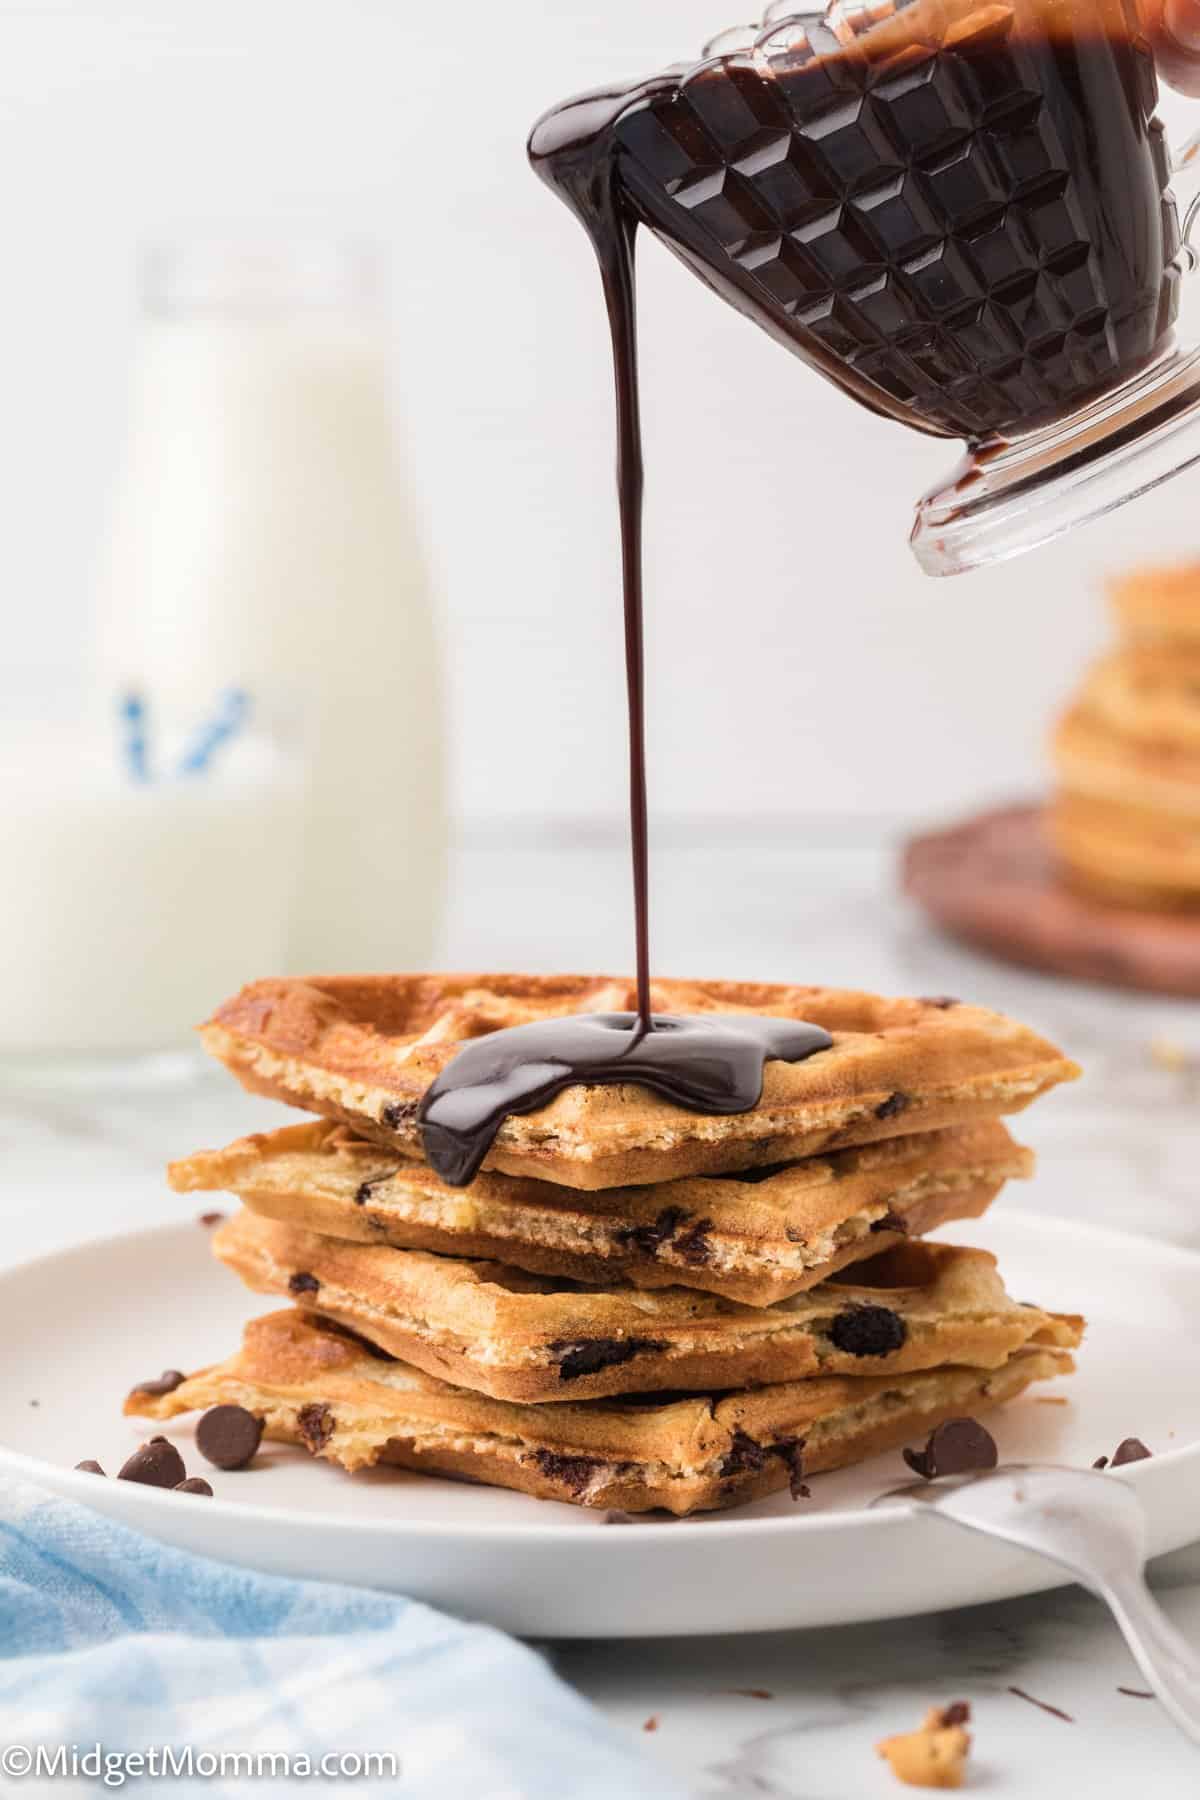 chocolate sauce drizzled on top of a stack of Chocolate Chip waffles